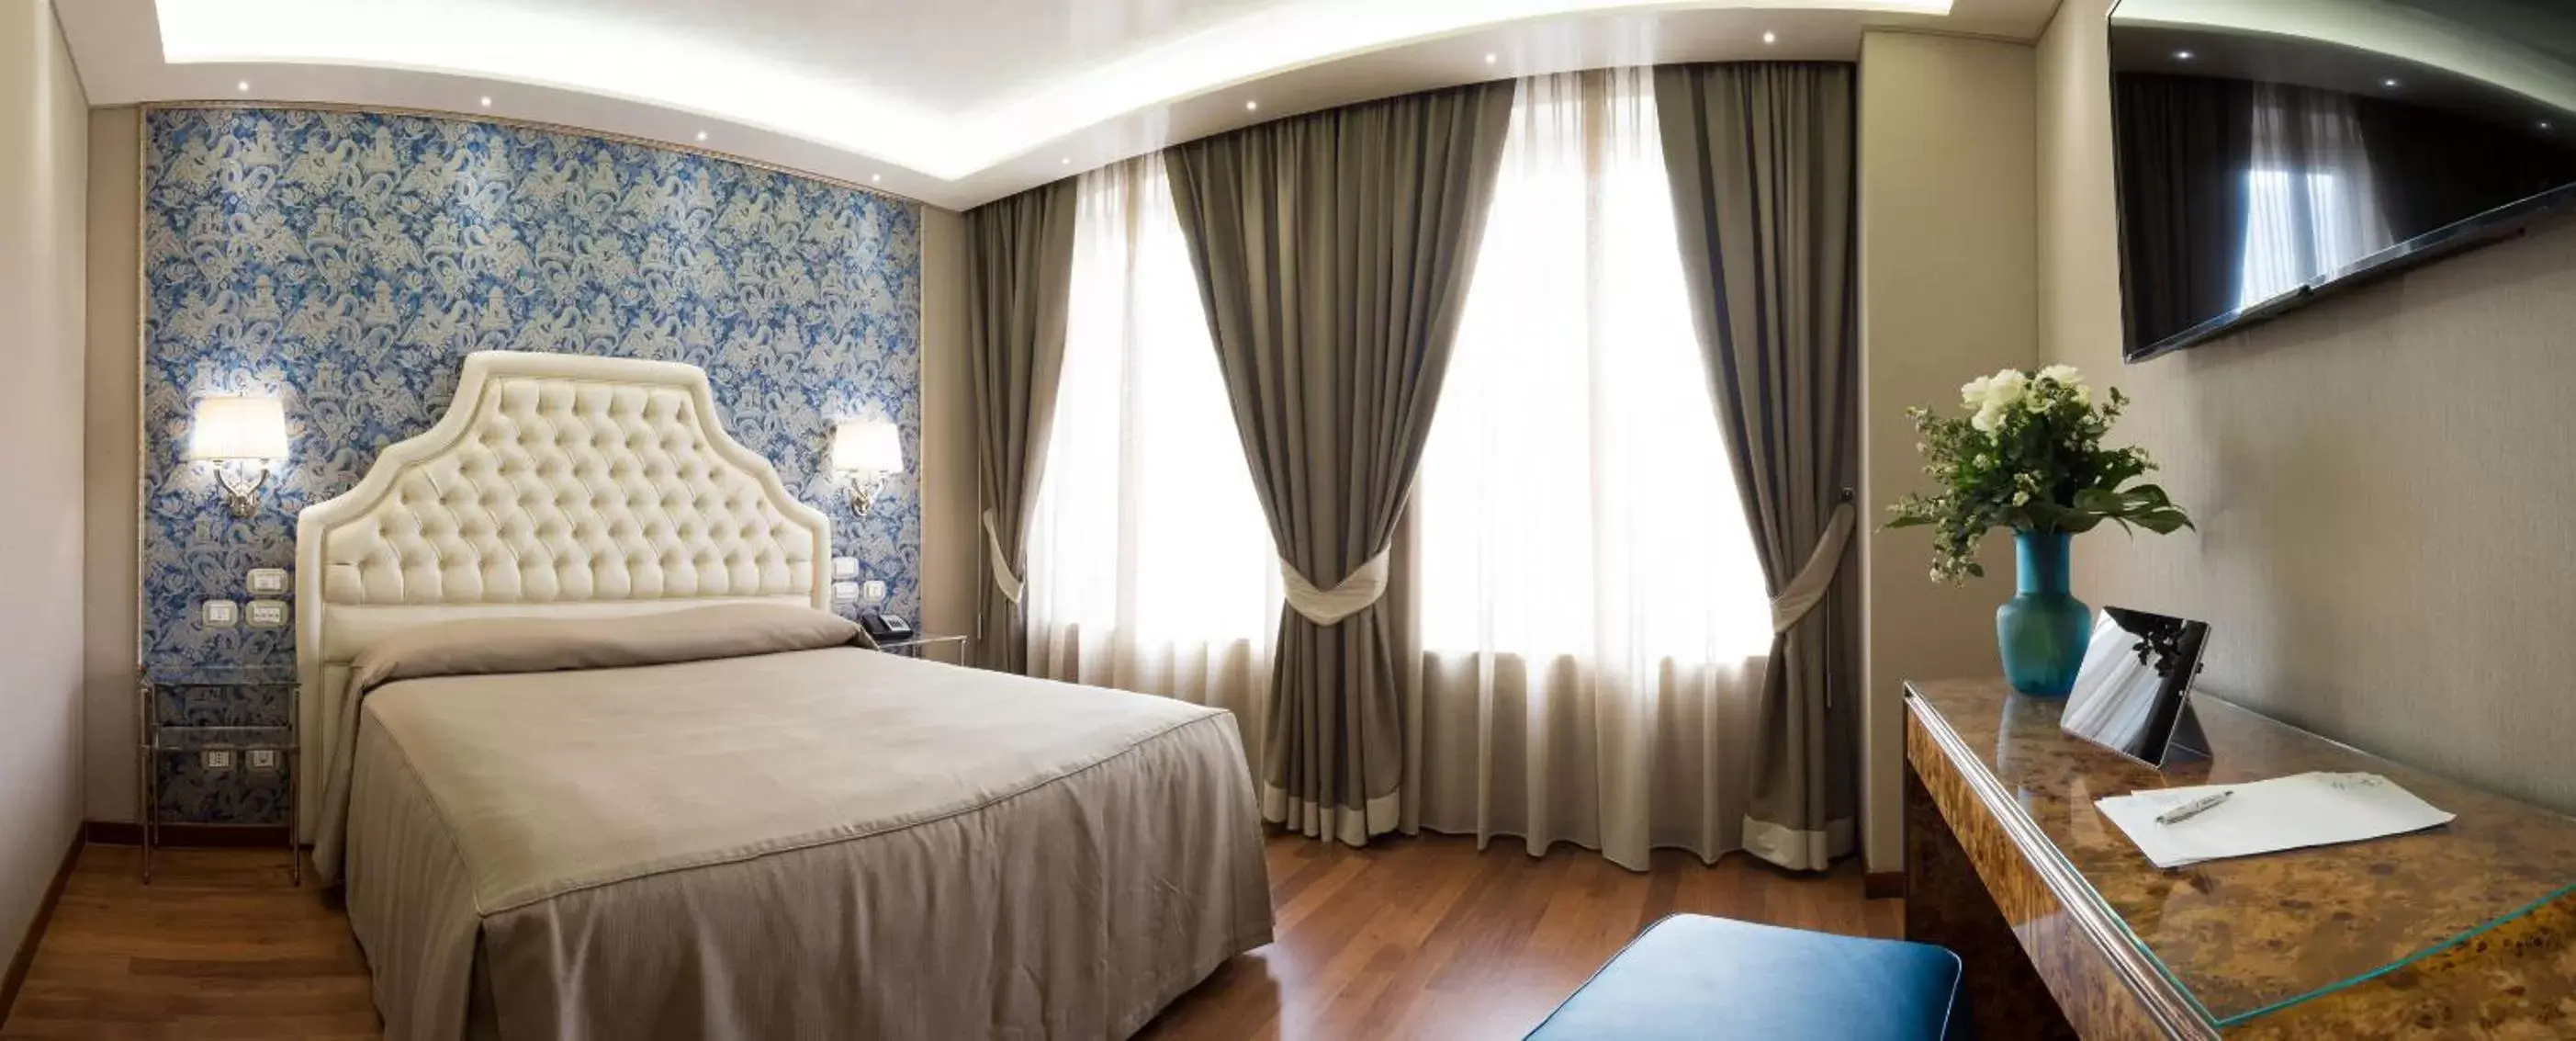 Deluxe Double or Twin Room with City View in Hotel Santa Chiara